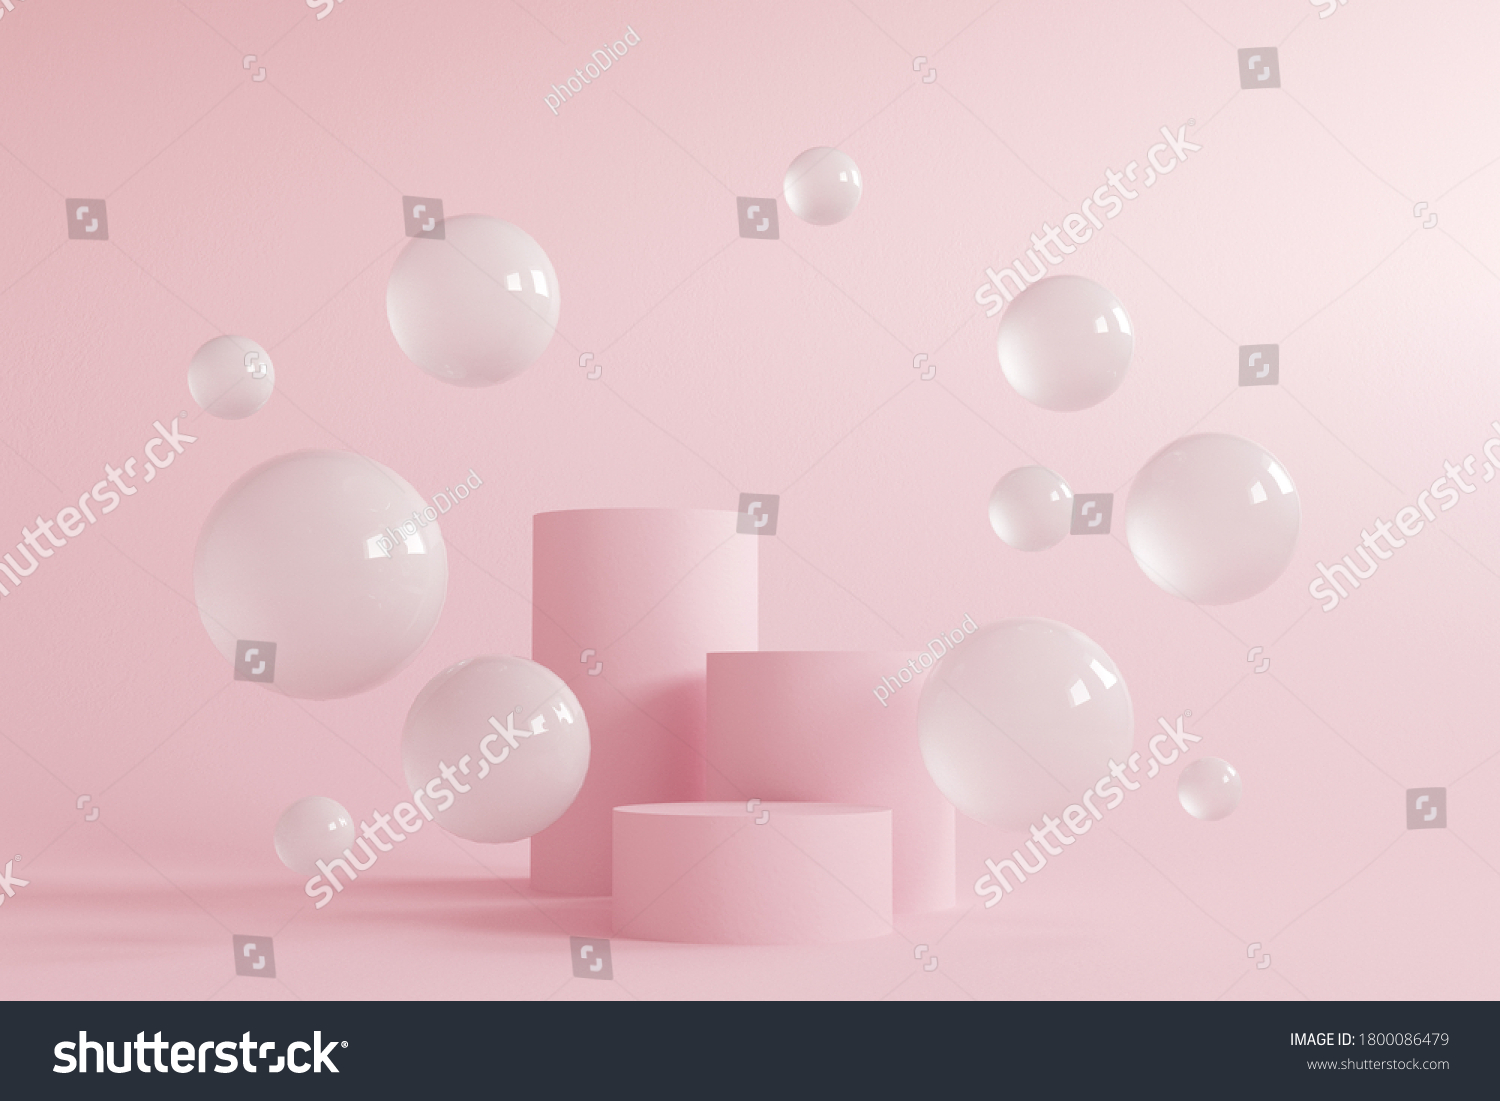 Abstract minimal scene with geometrical forms. Cylinder podiums in cream pink colors. Abstract background. Scene to show cosmetic podructs. Showcase, display case. 3d render. #1800086479